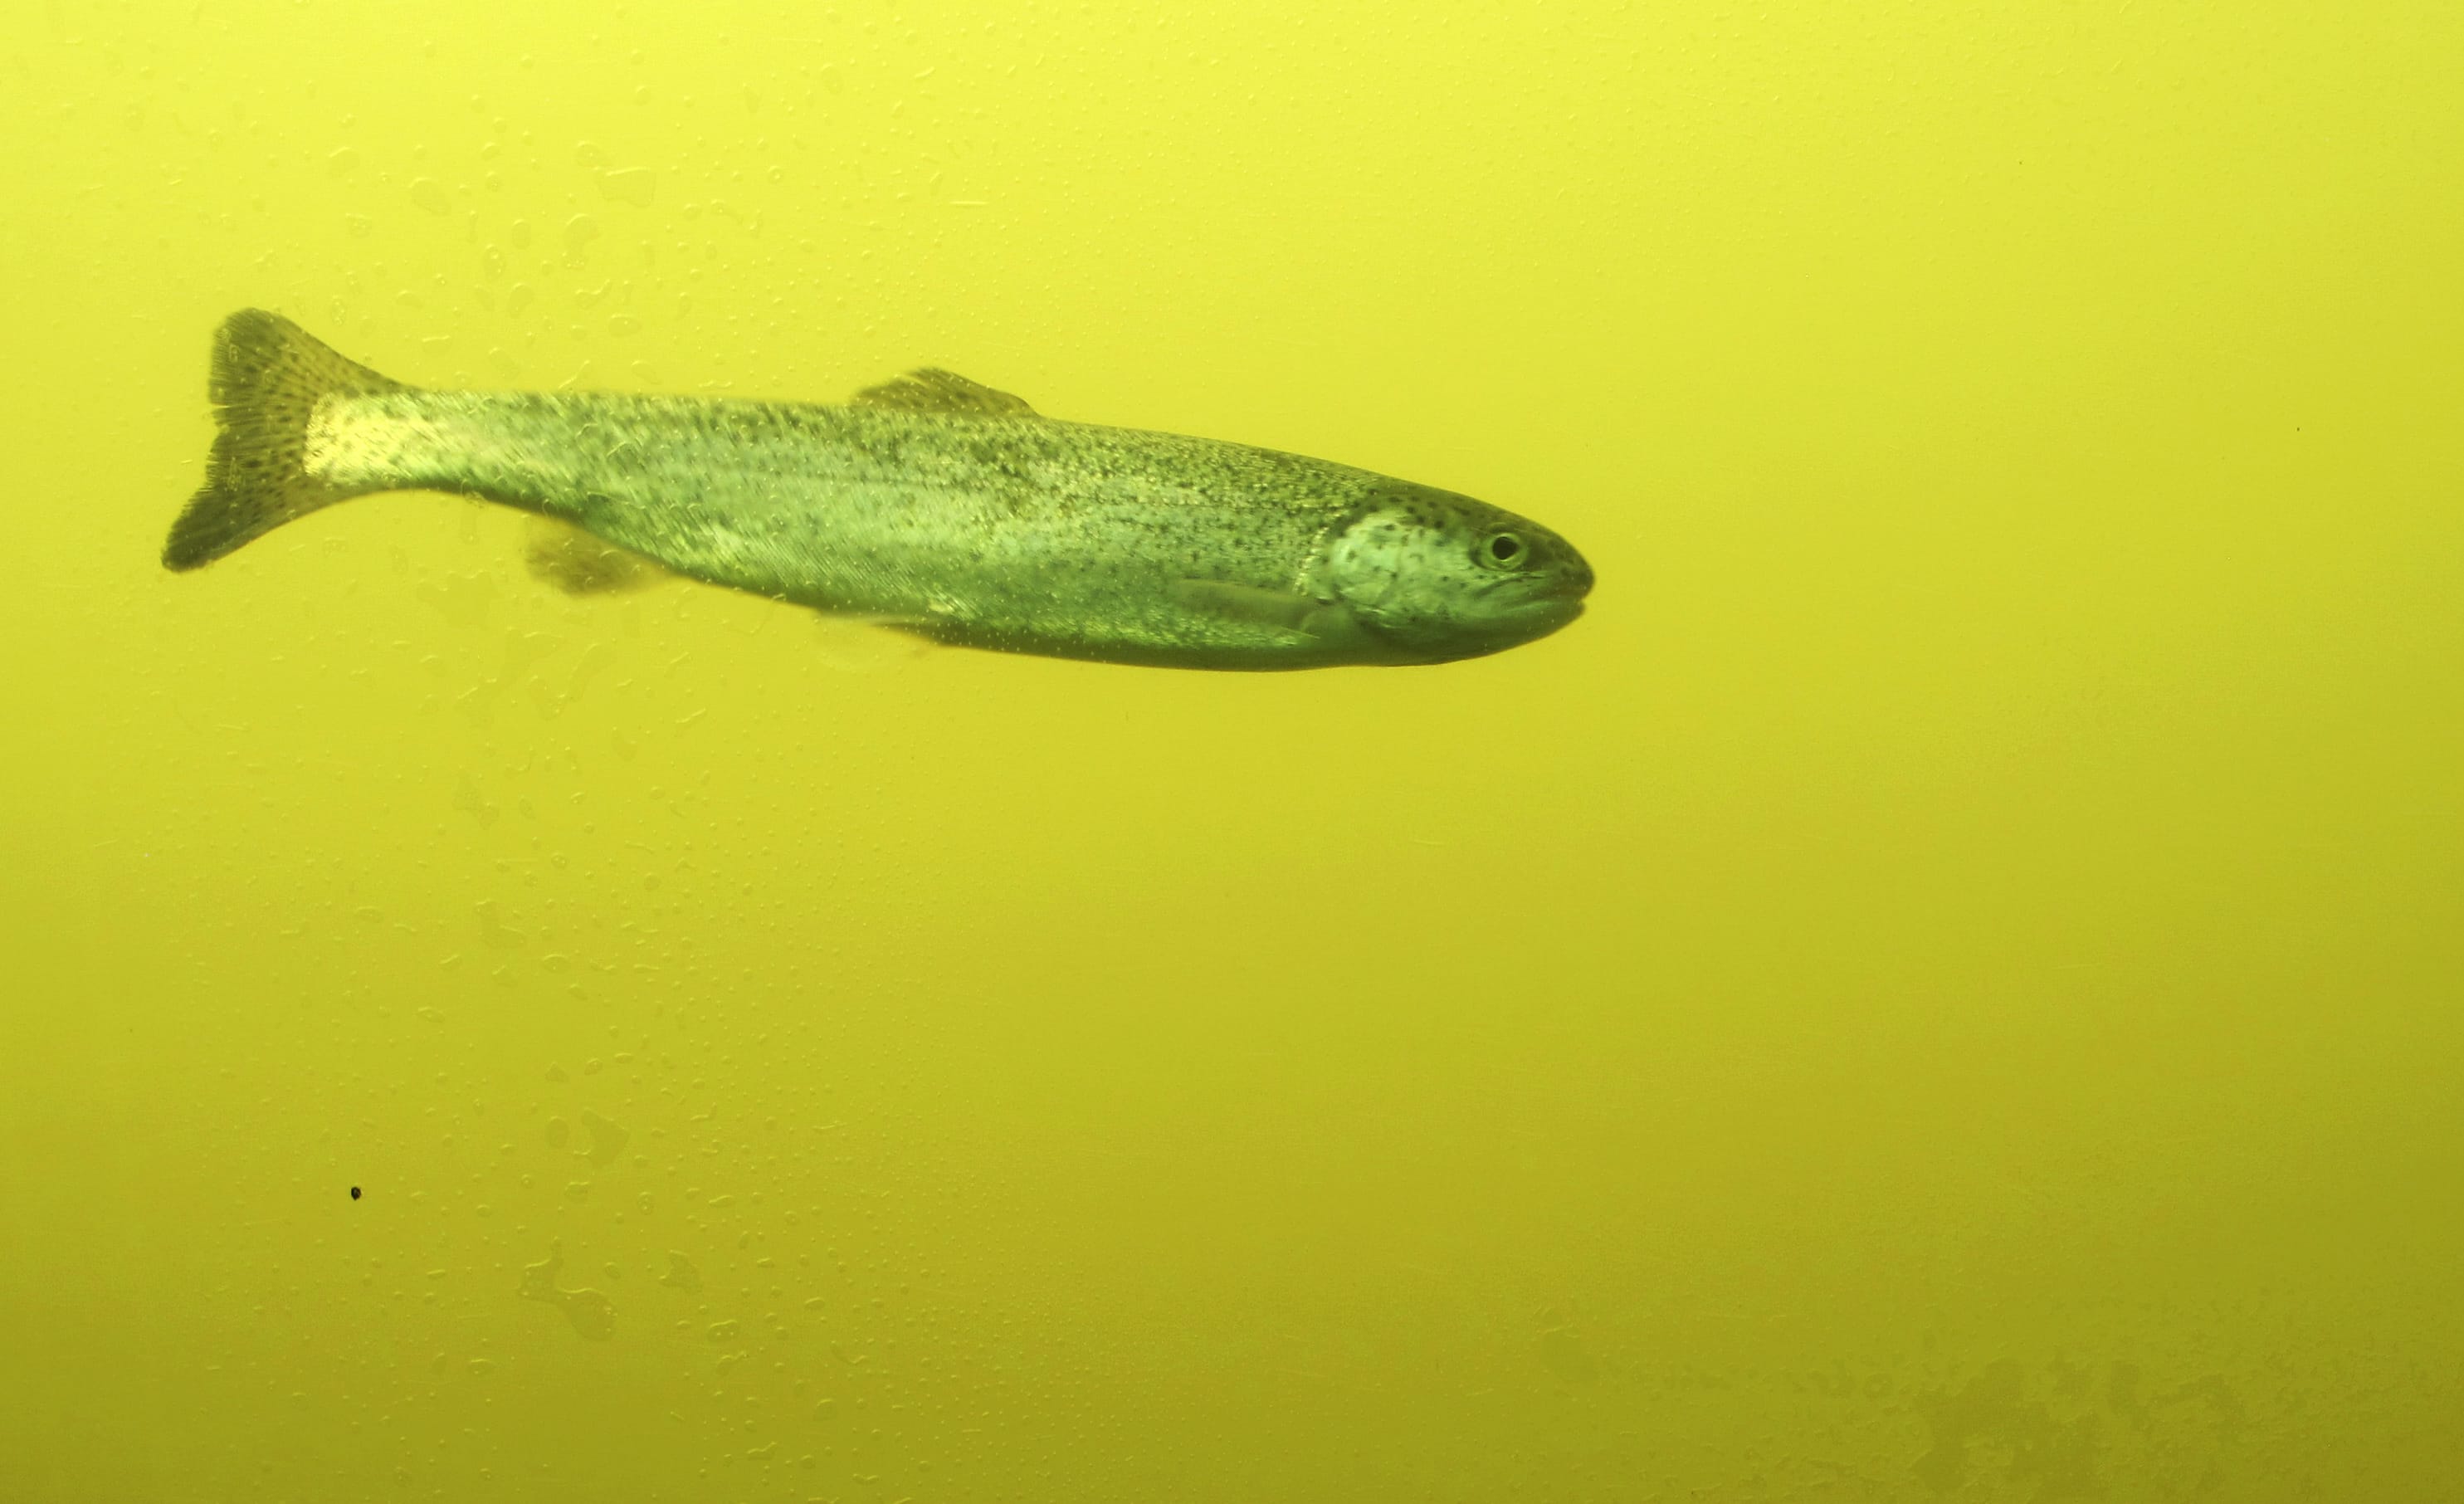 In this April 11, 2018 photo, a fish is seen in a viewing window at the visitors center of the Lower Granite Dam on the Snake River near Almota, Wash. Republican members of Congress from the Pacific Northwest are upset with a federal judge's order to spill water from the dam and three others on the Snake River in an attempt to help speed migrating salmon to the Pacific Ocean, saying the increased spill will result in lost power sales and could harm transportation, barging, flood control and irrigation systems. (AP Photo/Nicholas K.